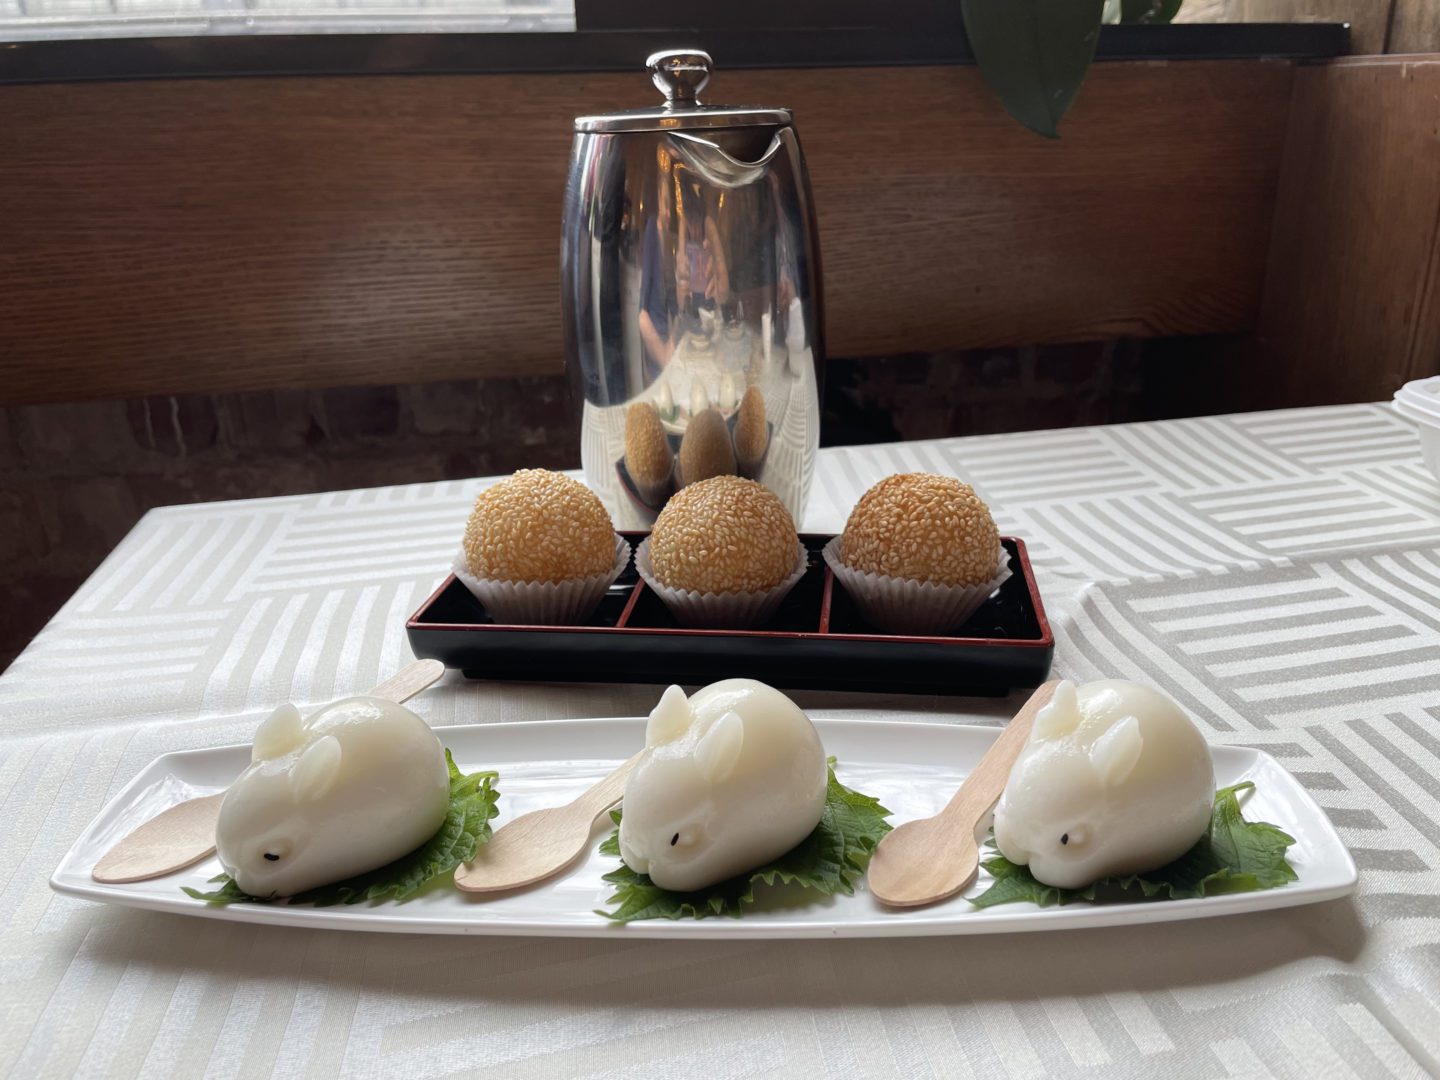 Chef Tony signature coconut jelly bunnies and sesame rice balls for dessert.